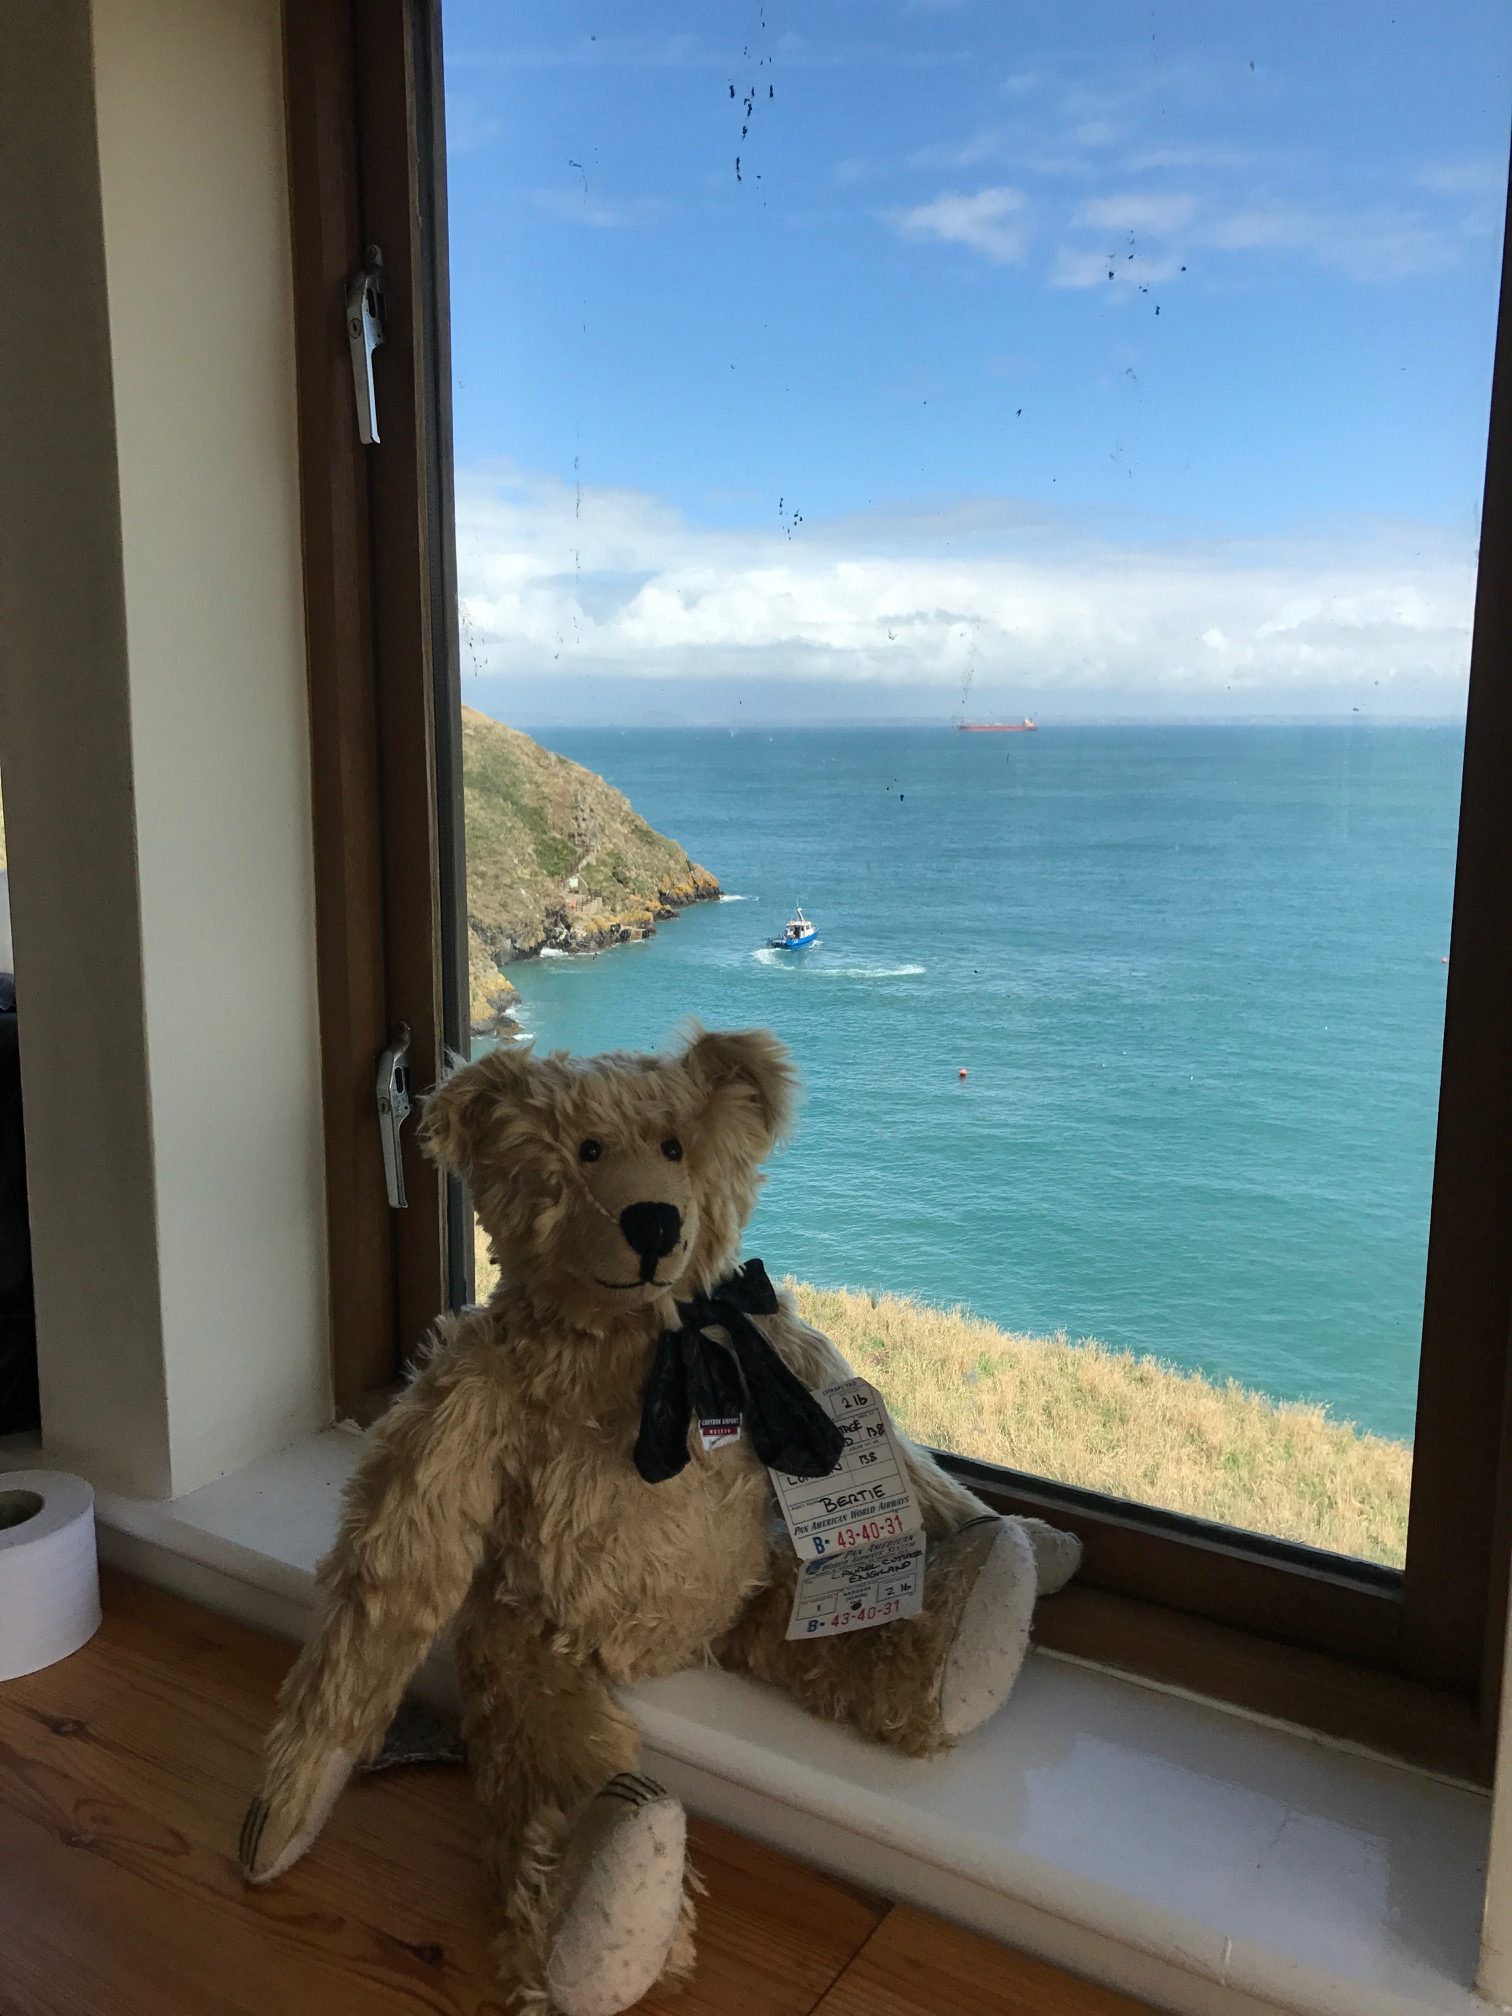 Giselle Eagle: Me in the wardens' office. A “room with a view”.